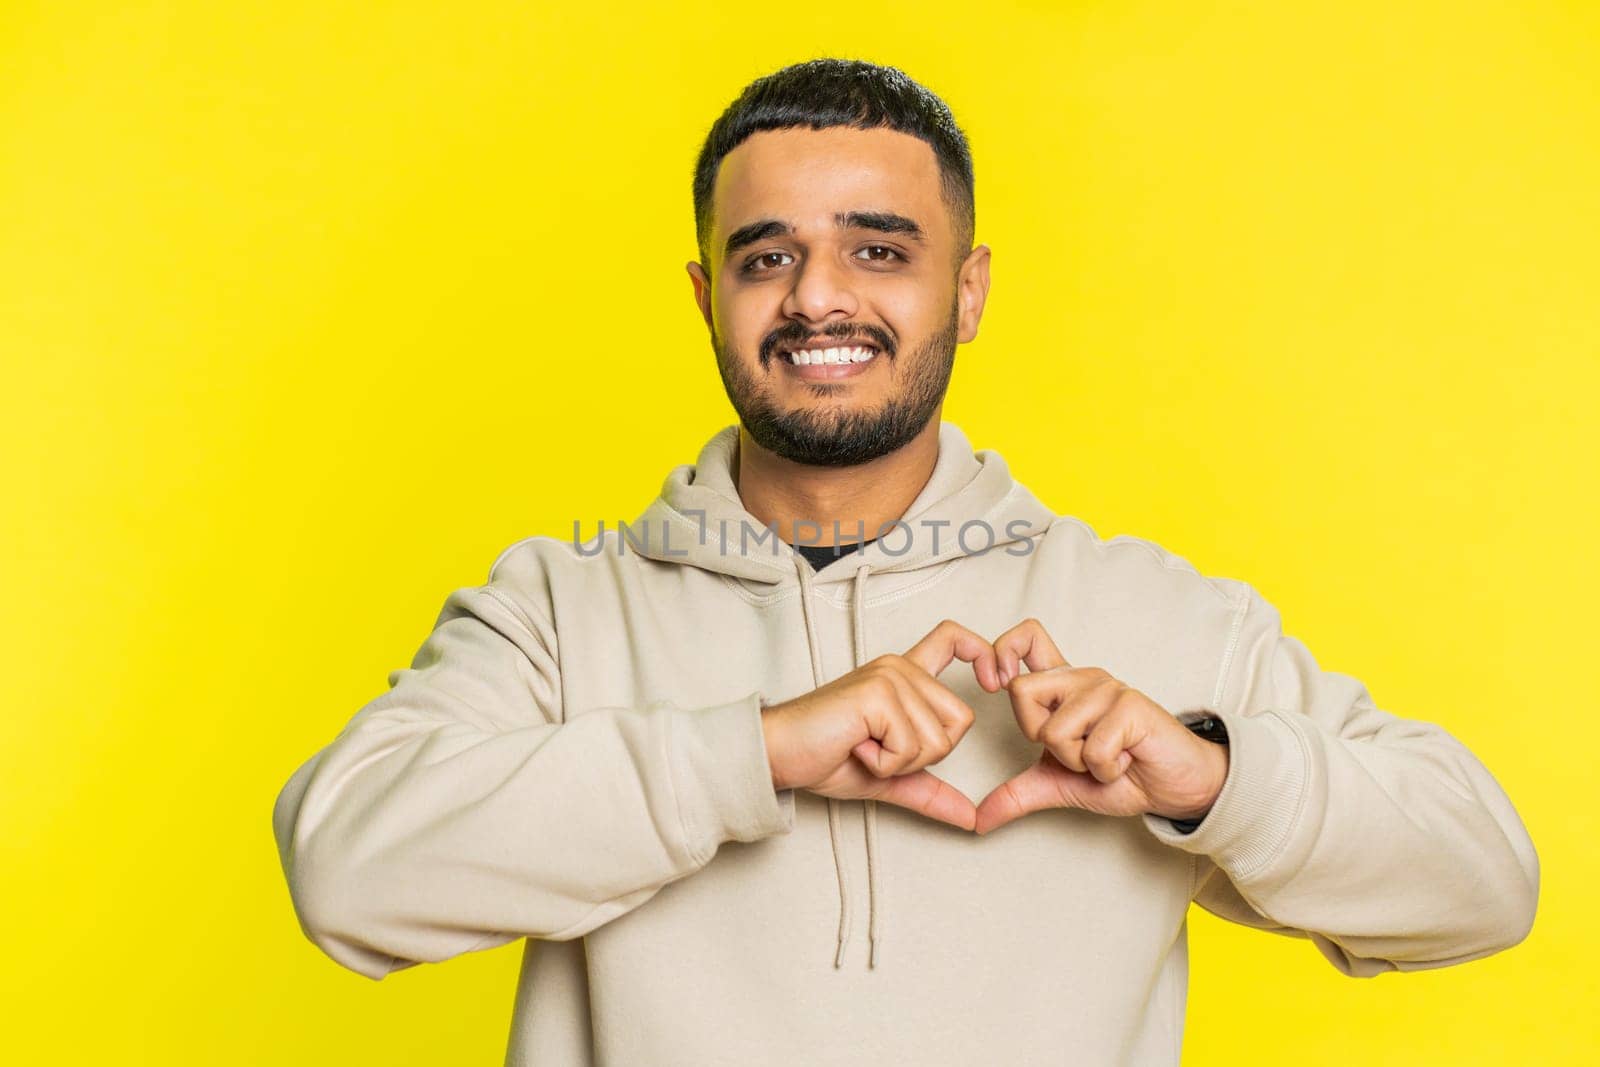 Man in love. Smiling attractive Indian man makes heart gesture demonstrates love sign expresses good positive feelings and sympathy. Handsome Arabian Hindu young guy isolated on yellow wall background